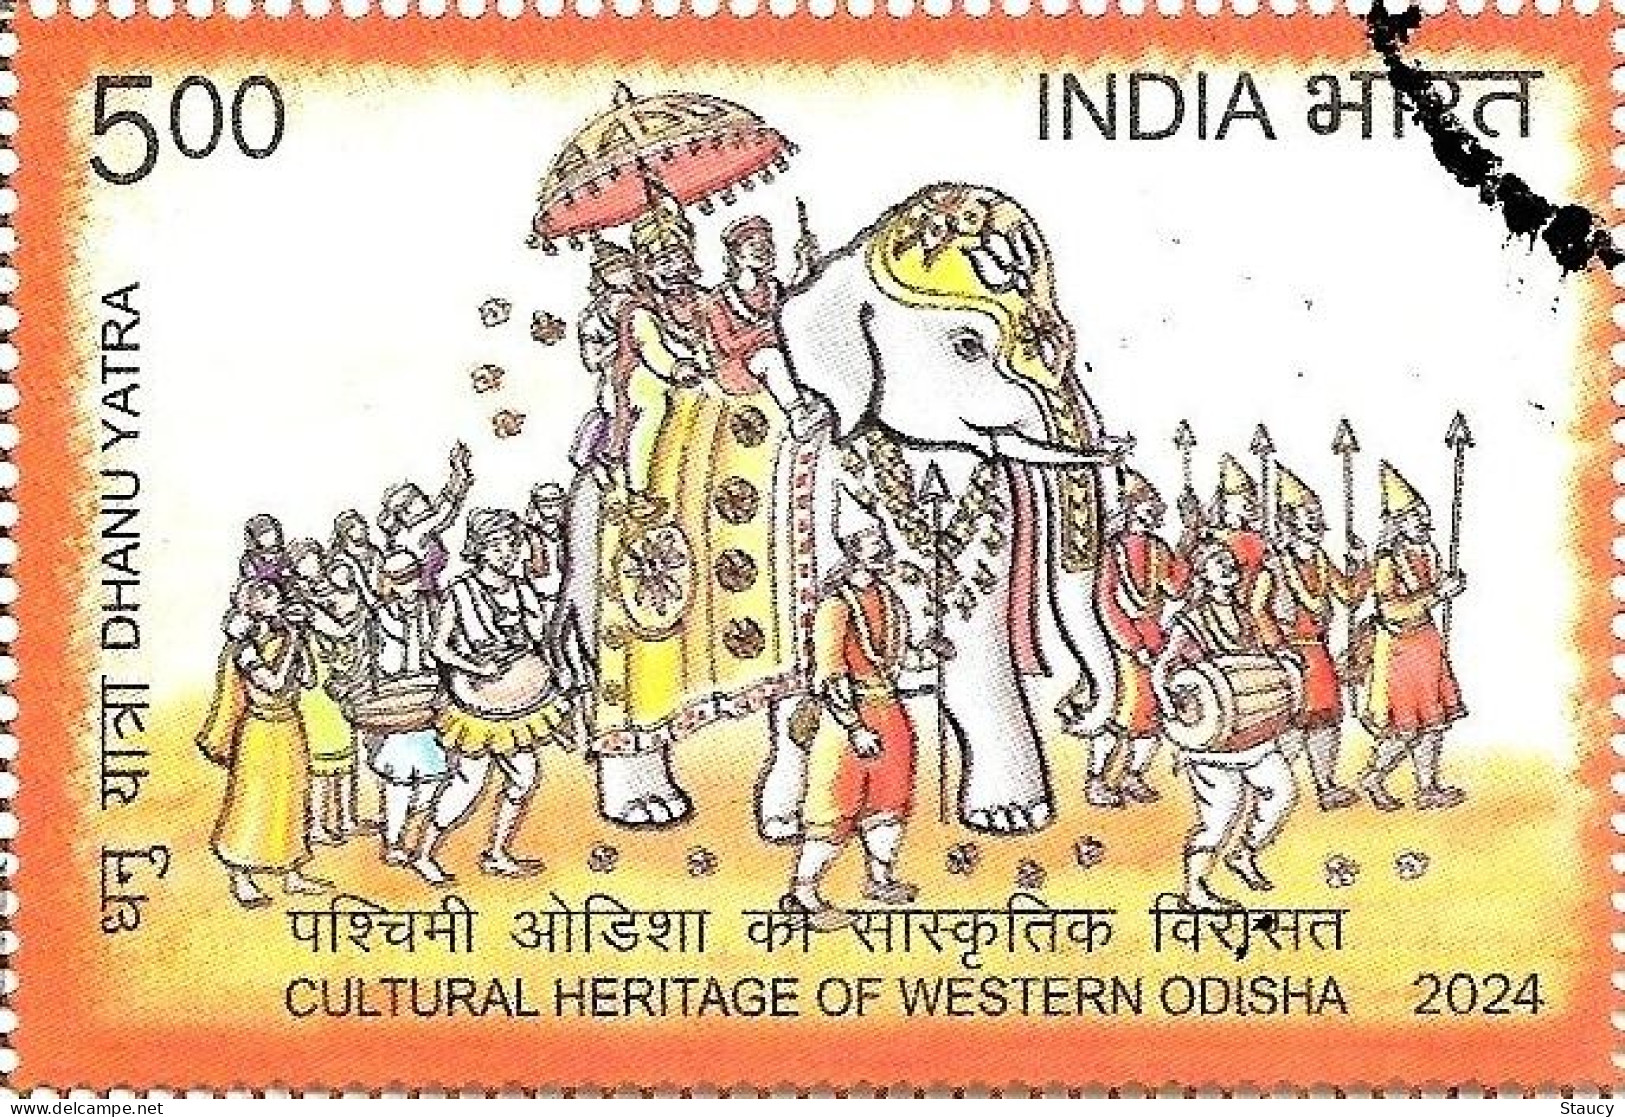 India 2024 CULTURAL HERITAGE OF WESTERN ODISHA 6v Stamp Set Handicraft etc Used or First Day Cancelled as per scan